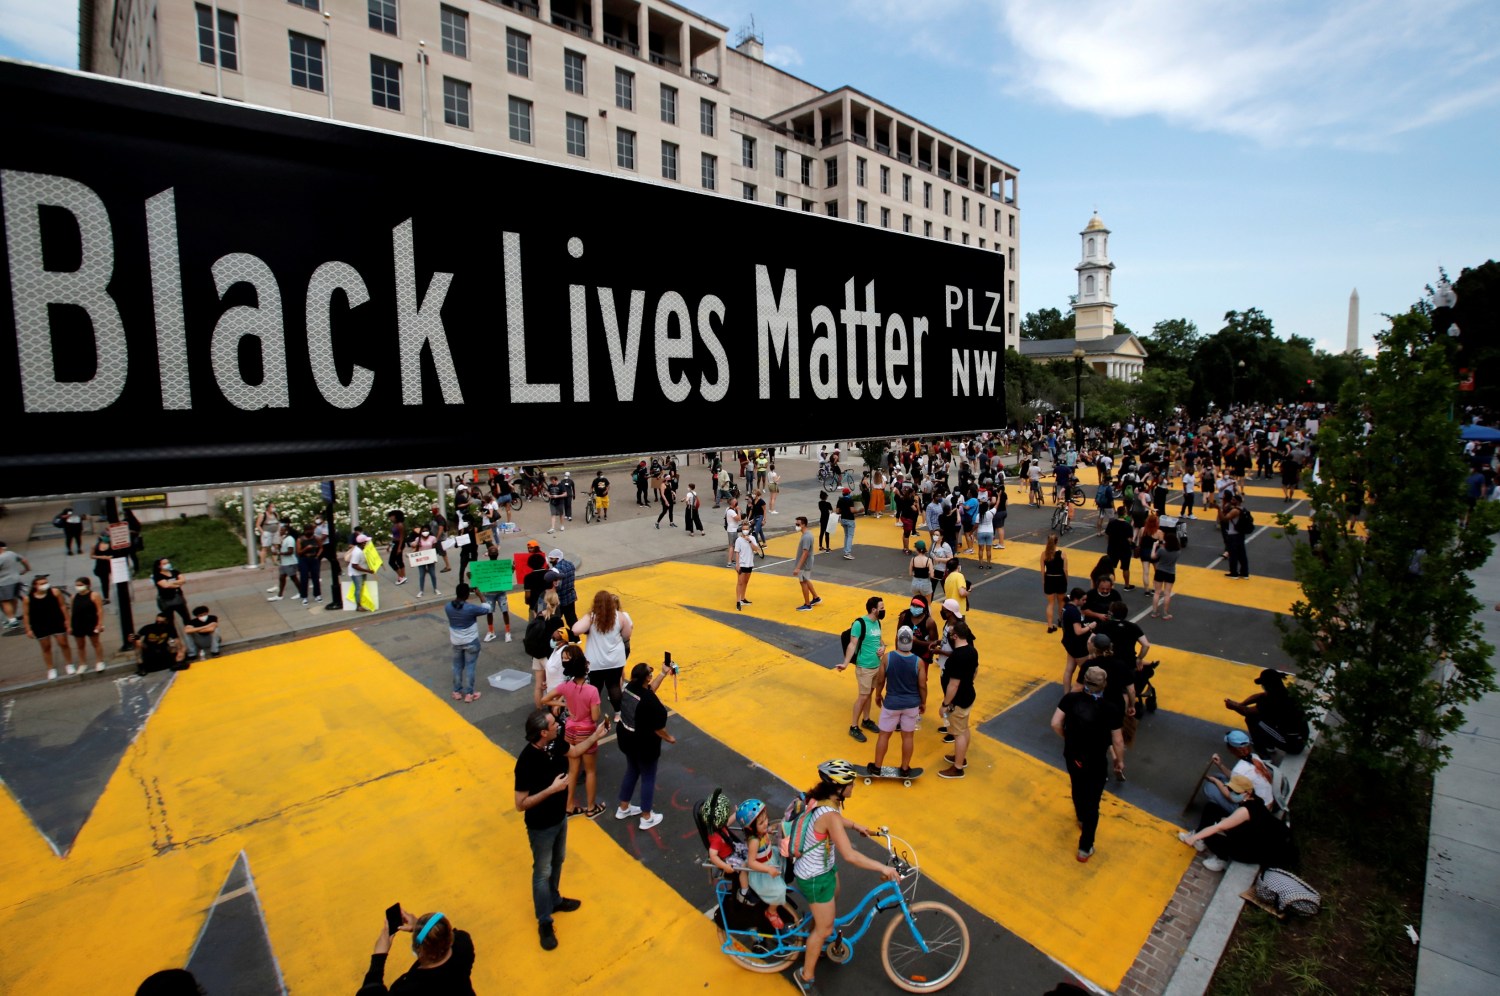 A street sign of Black Lives Matter Plaza is seen near St. John's Episcopal Church, as the protests against the death in Minneapolis police custody of George Floyd continue, in Washington, U.S., June 5, 2020. REUTERS/Carlos Barria     TPX IMAGES OF THE DAY